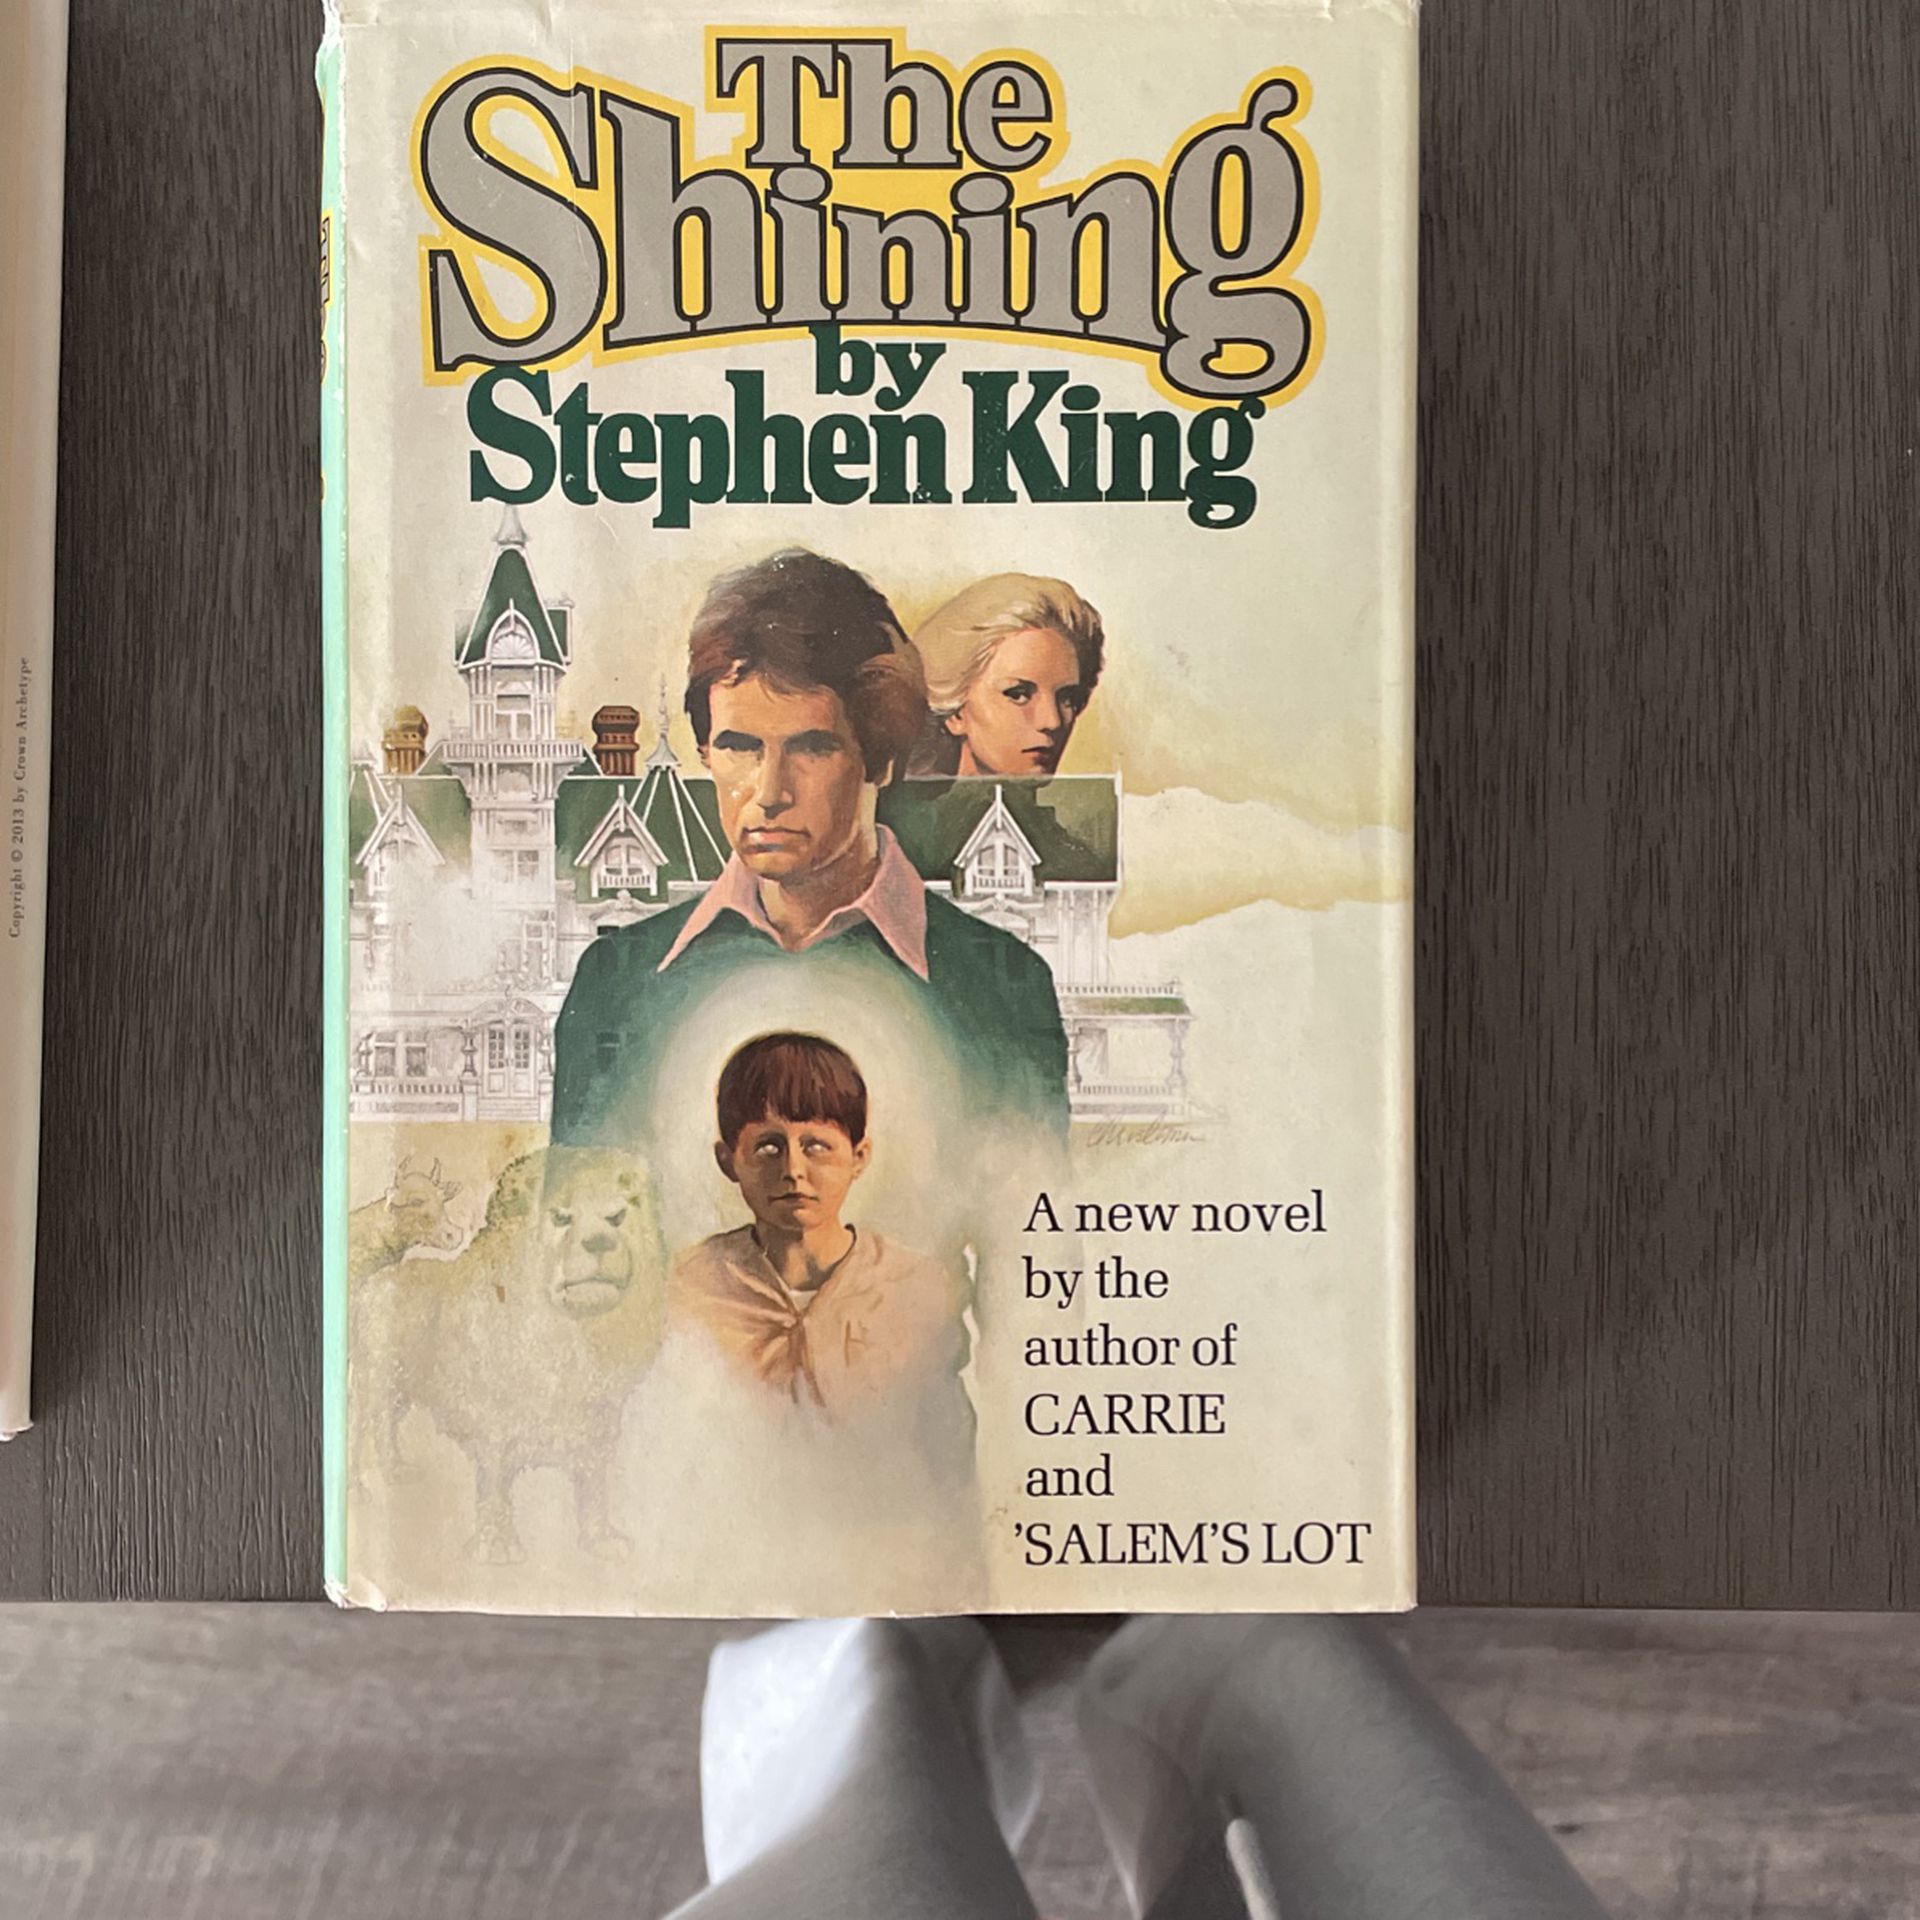 The Shining by Stephen king